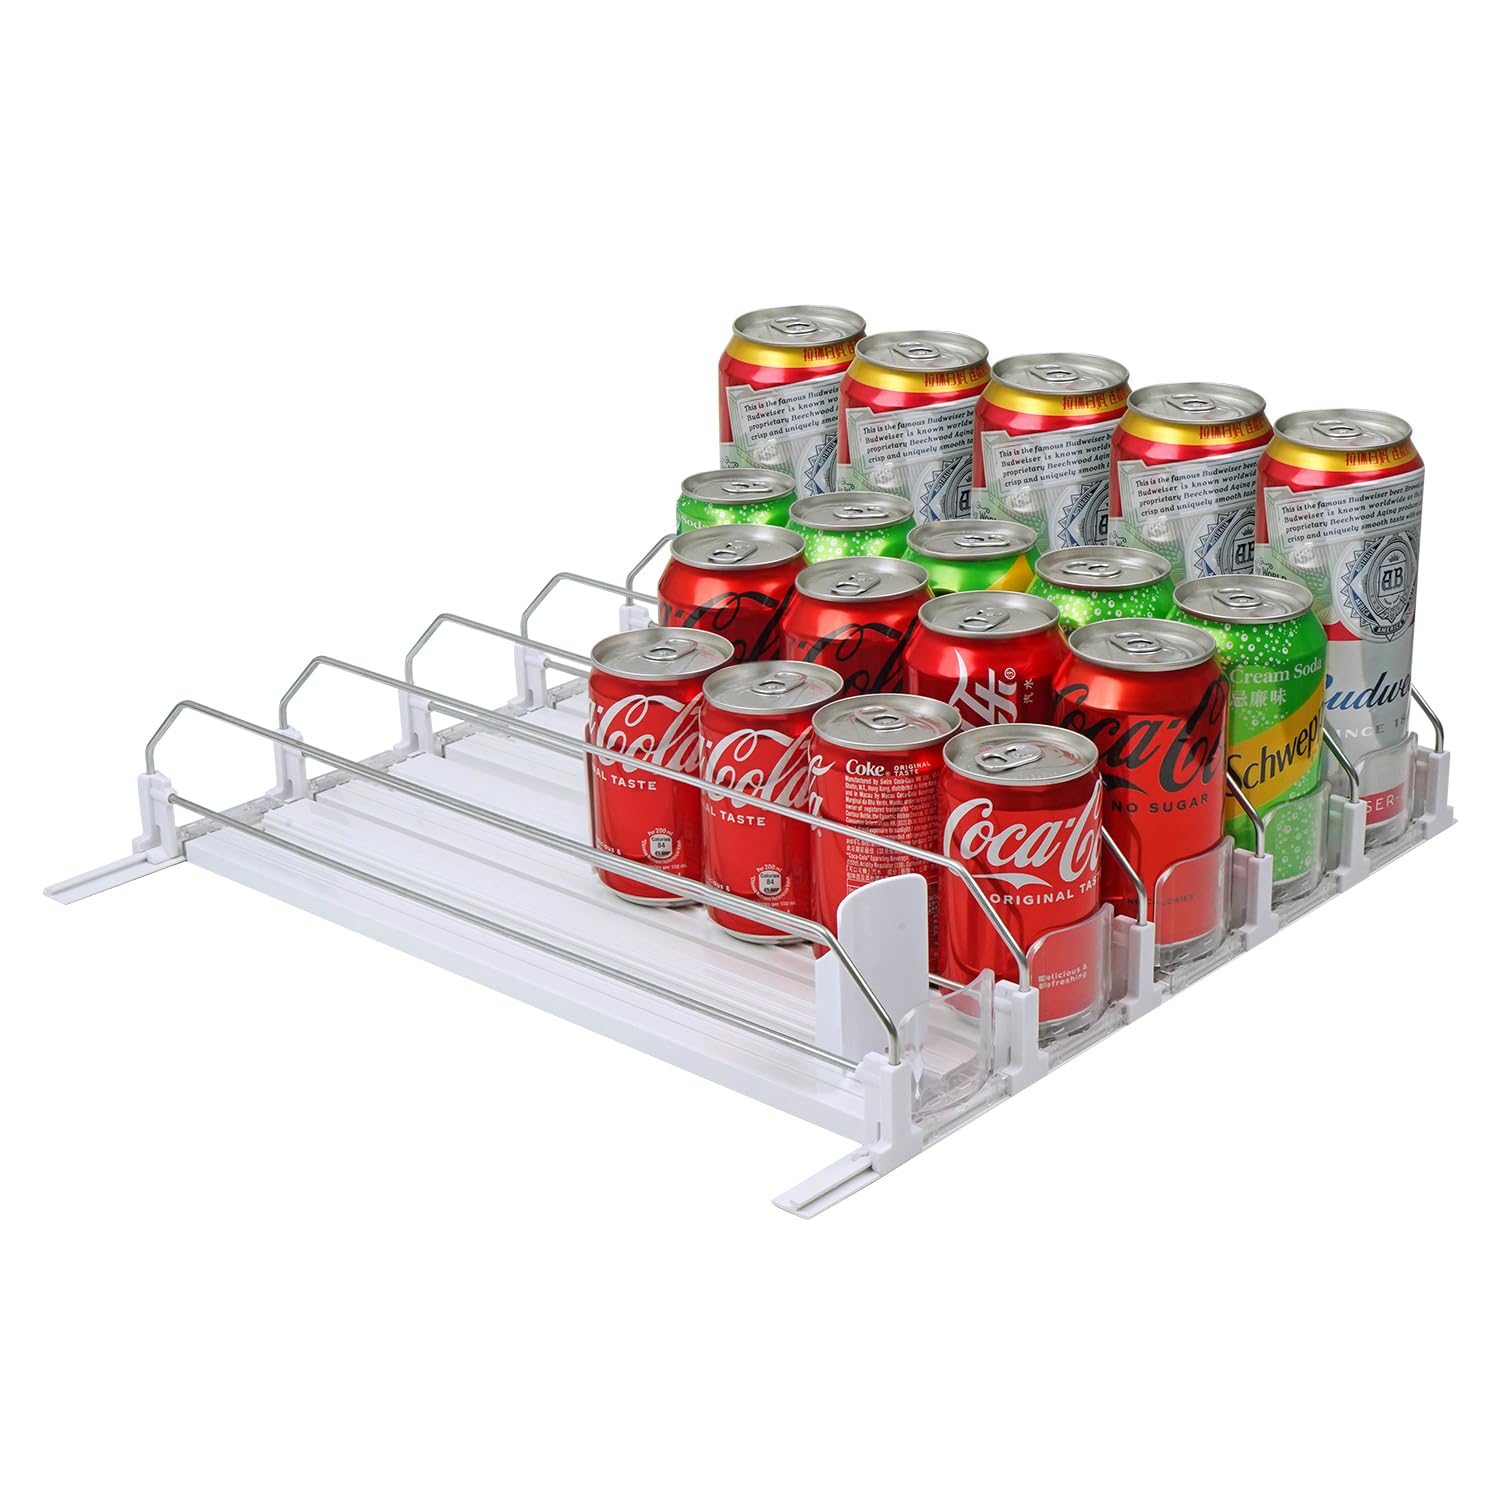 BUDO Soda Can Organizer, Drink Self-Pushing Dispenser for Fridge, Holds 25 Cans Width Adjustable Beer Pop Can Water Bottle Holder (15inch, White)